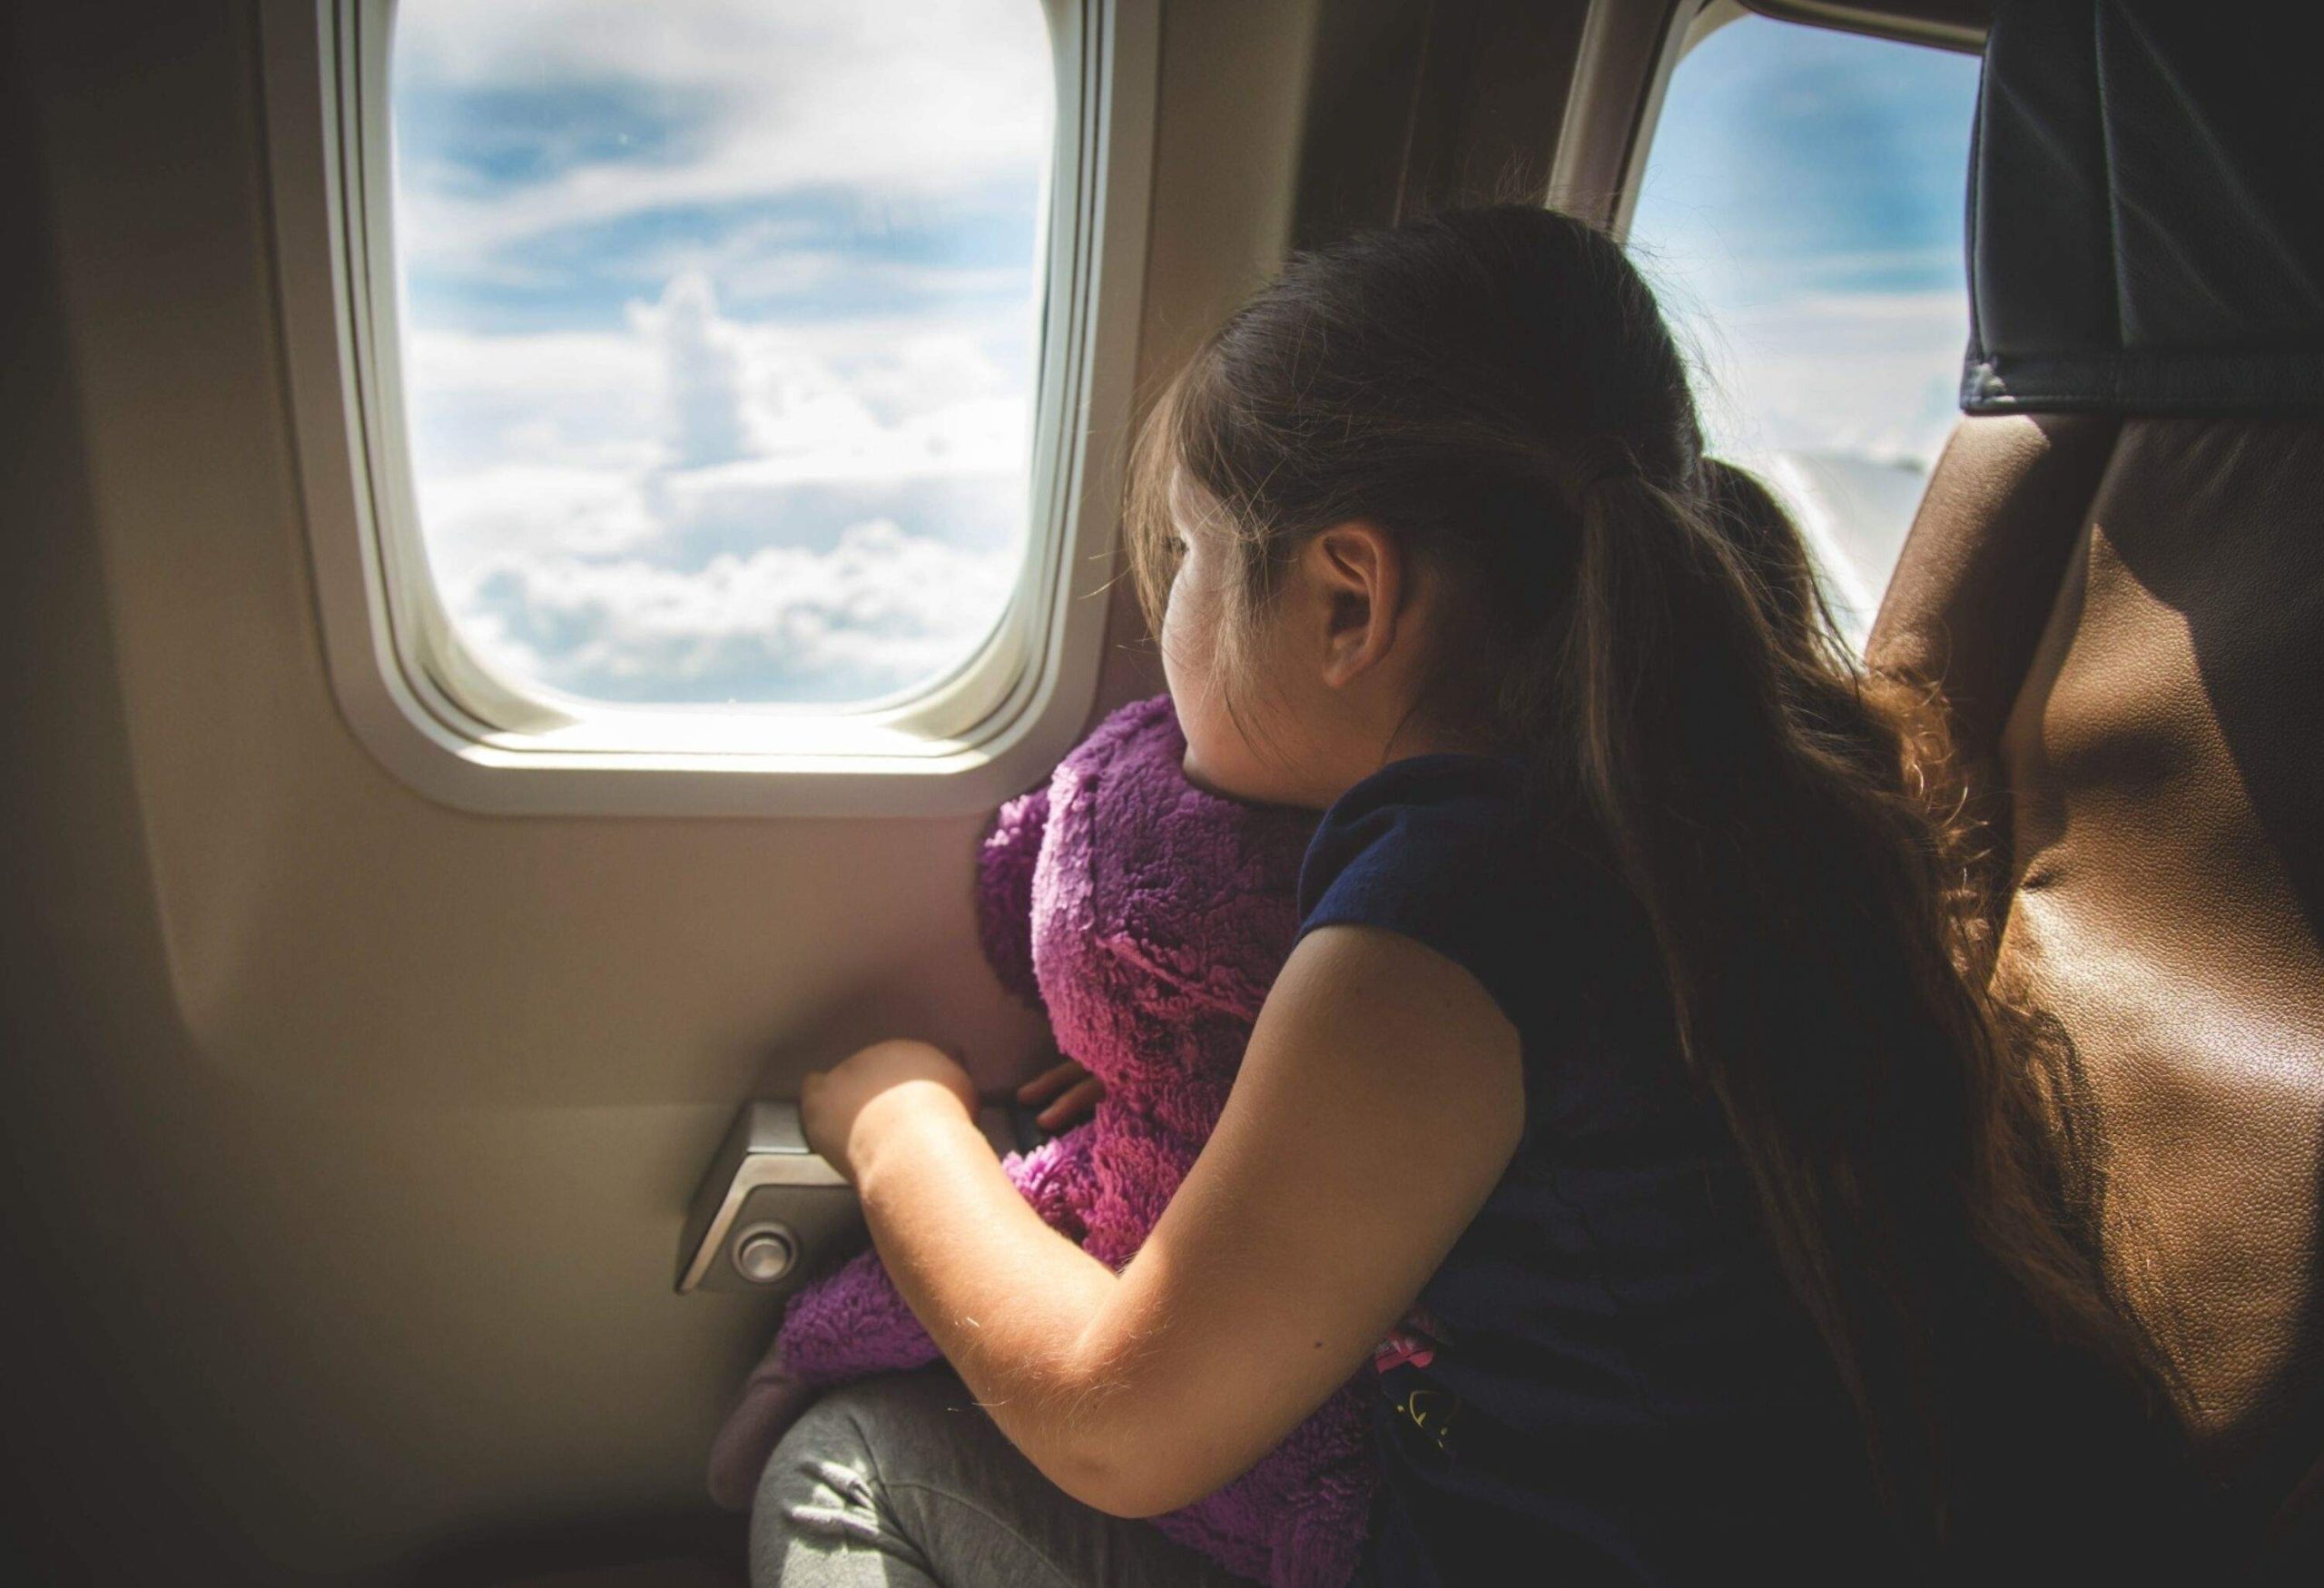 A little girl holding a purple stuffed toy as she looks out the window of an airplane.